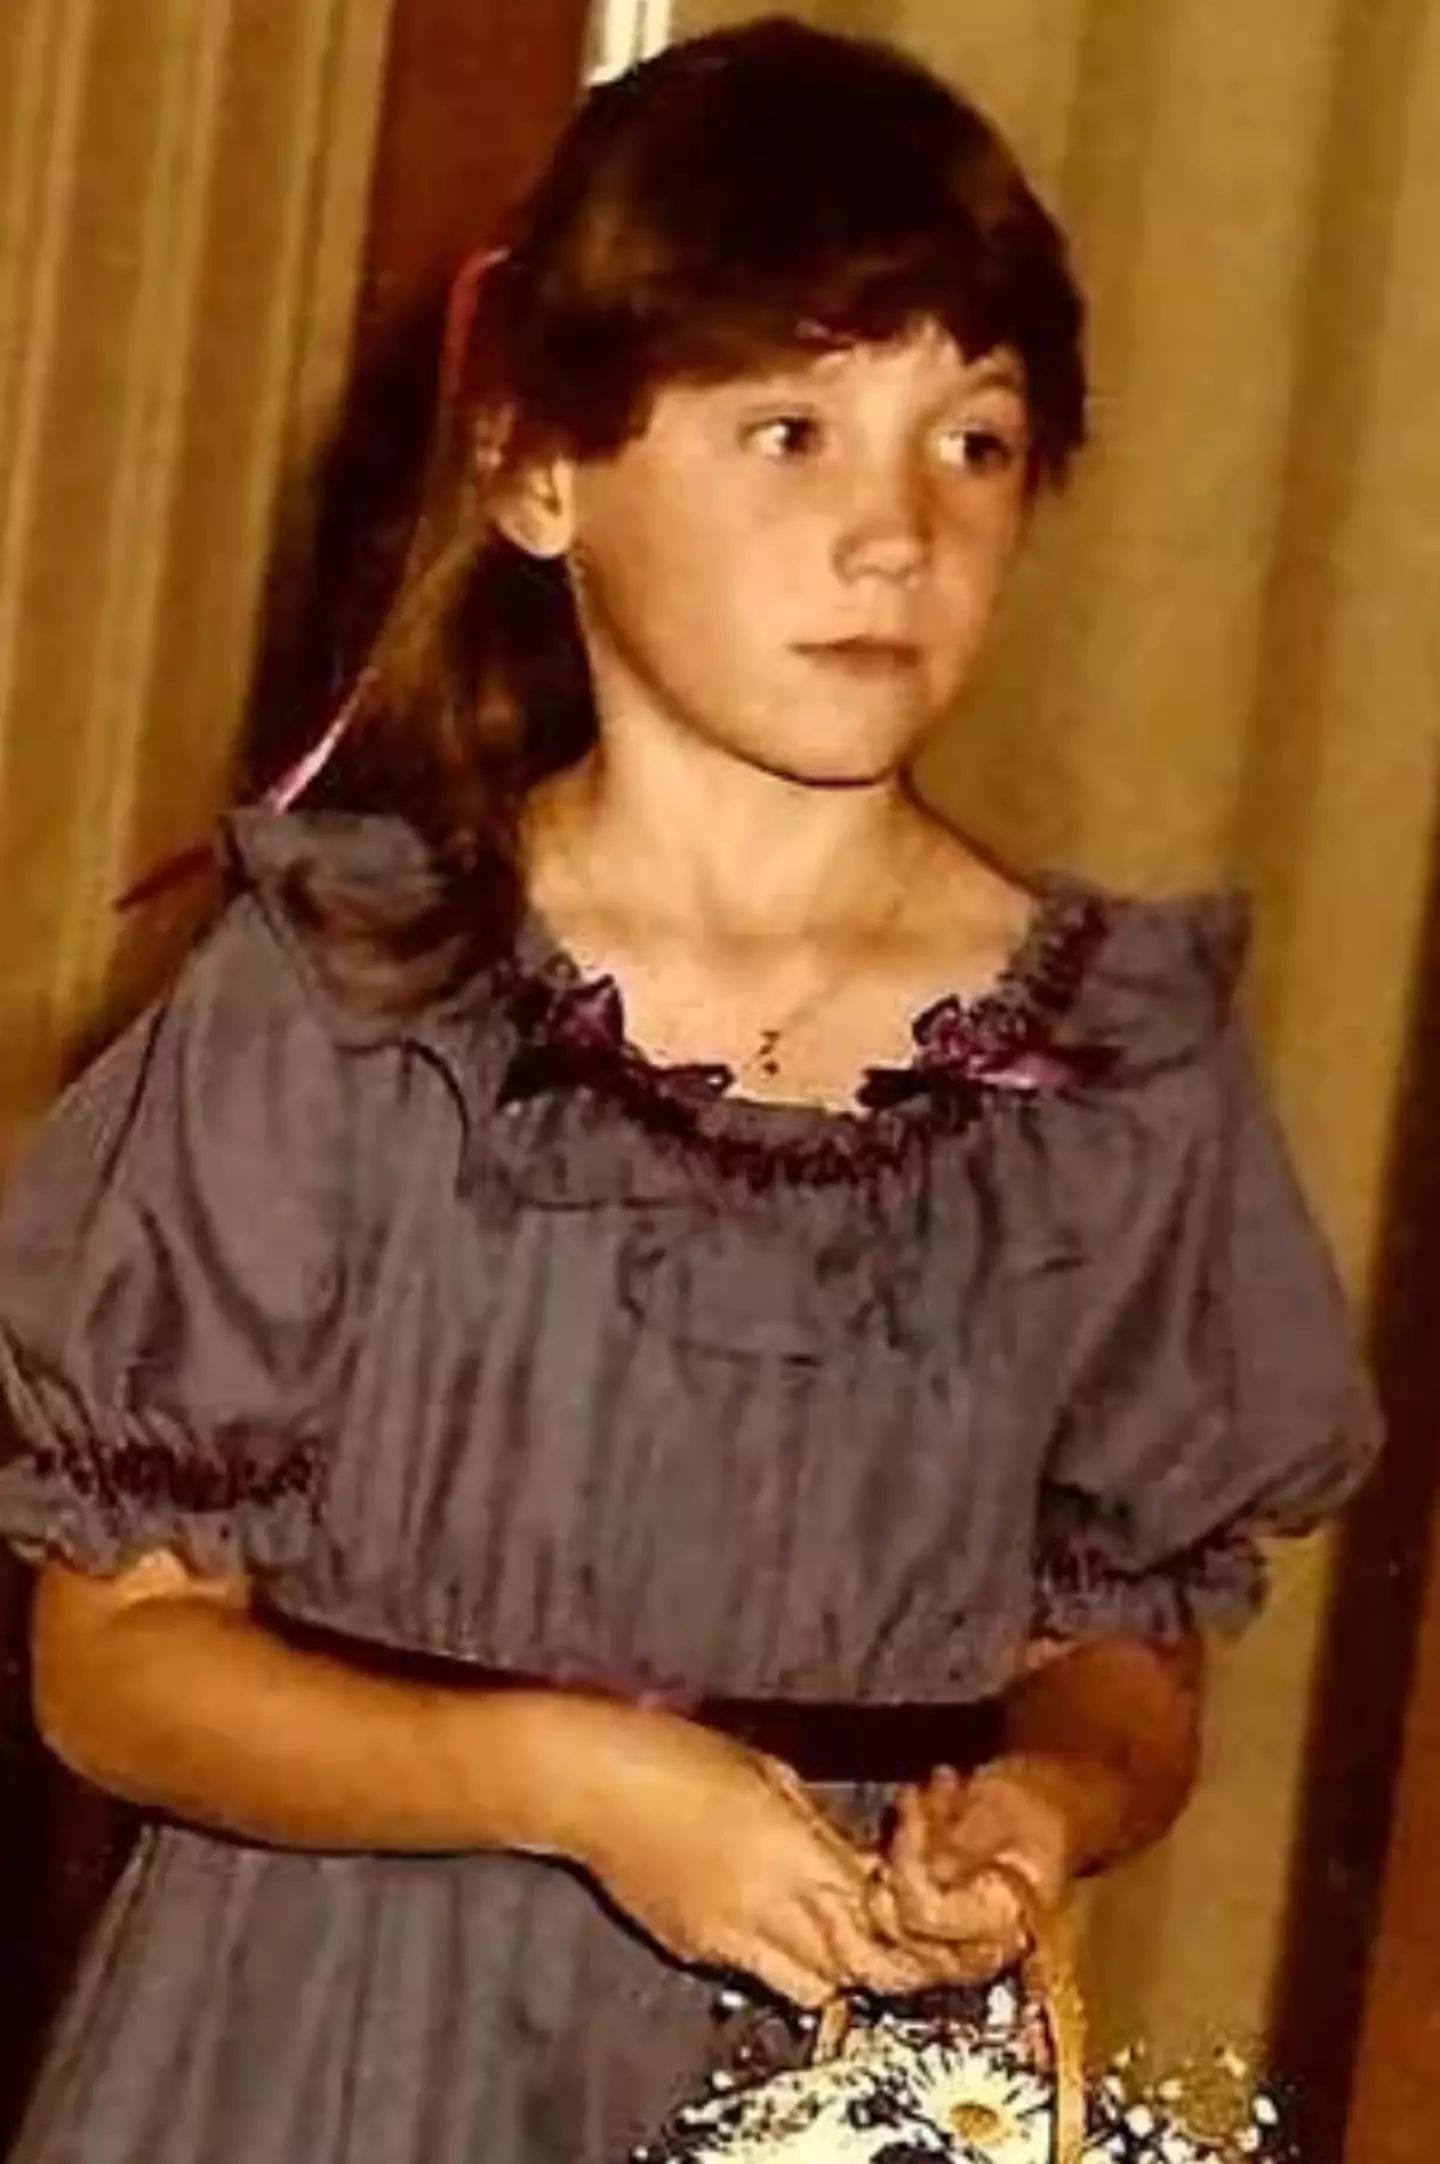 Layla Cummings was murdered in 1984. (Oklahoma Attorney General's Office)